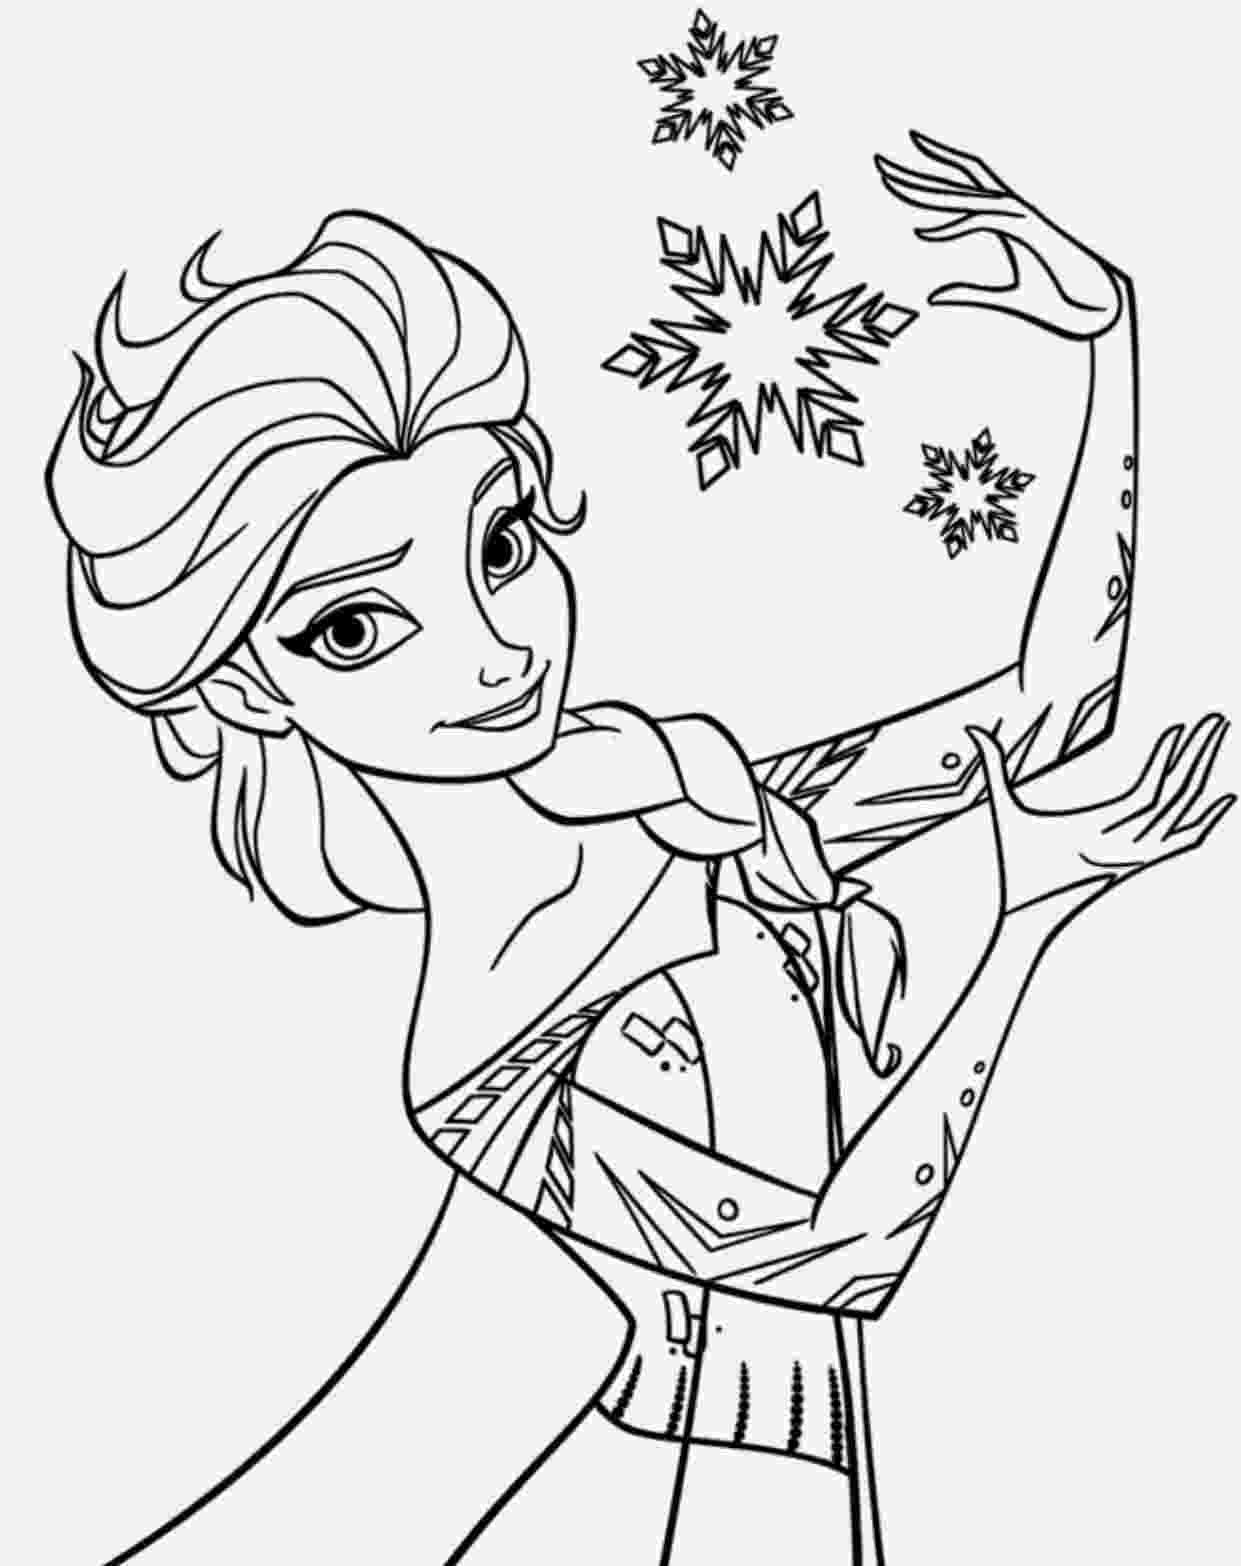 print frozen coloring pages 15 beautiful disney frozen coloring pages free instant print frozen pages coloring 